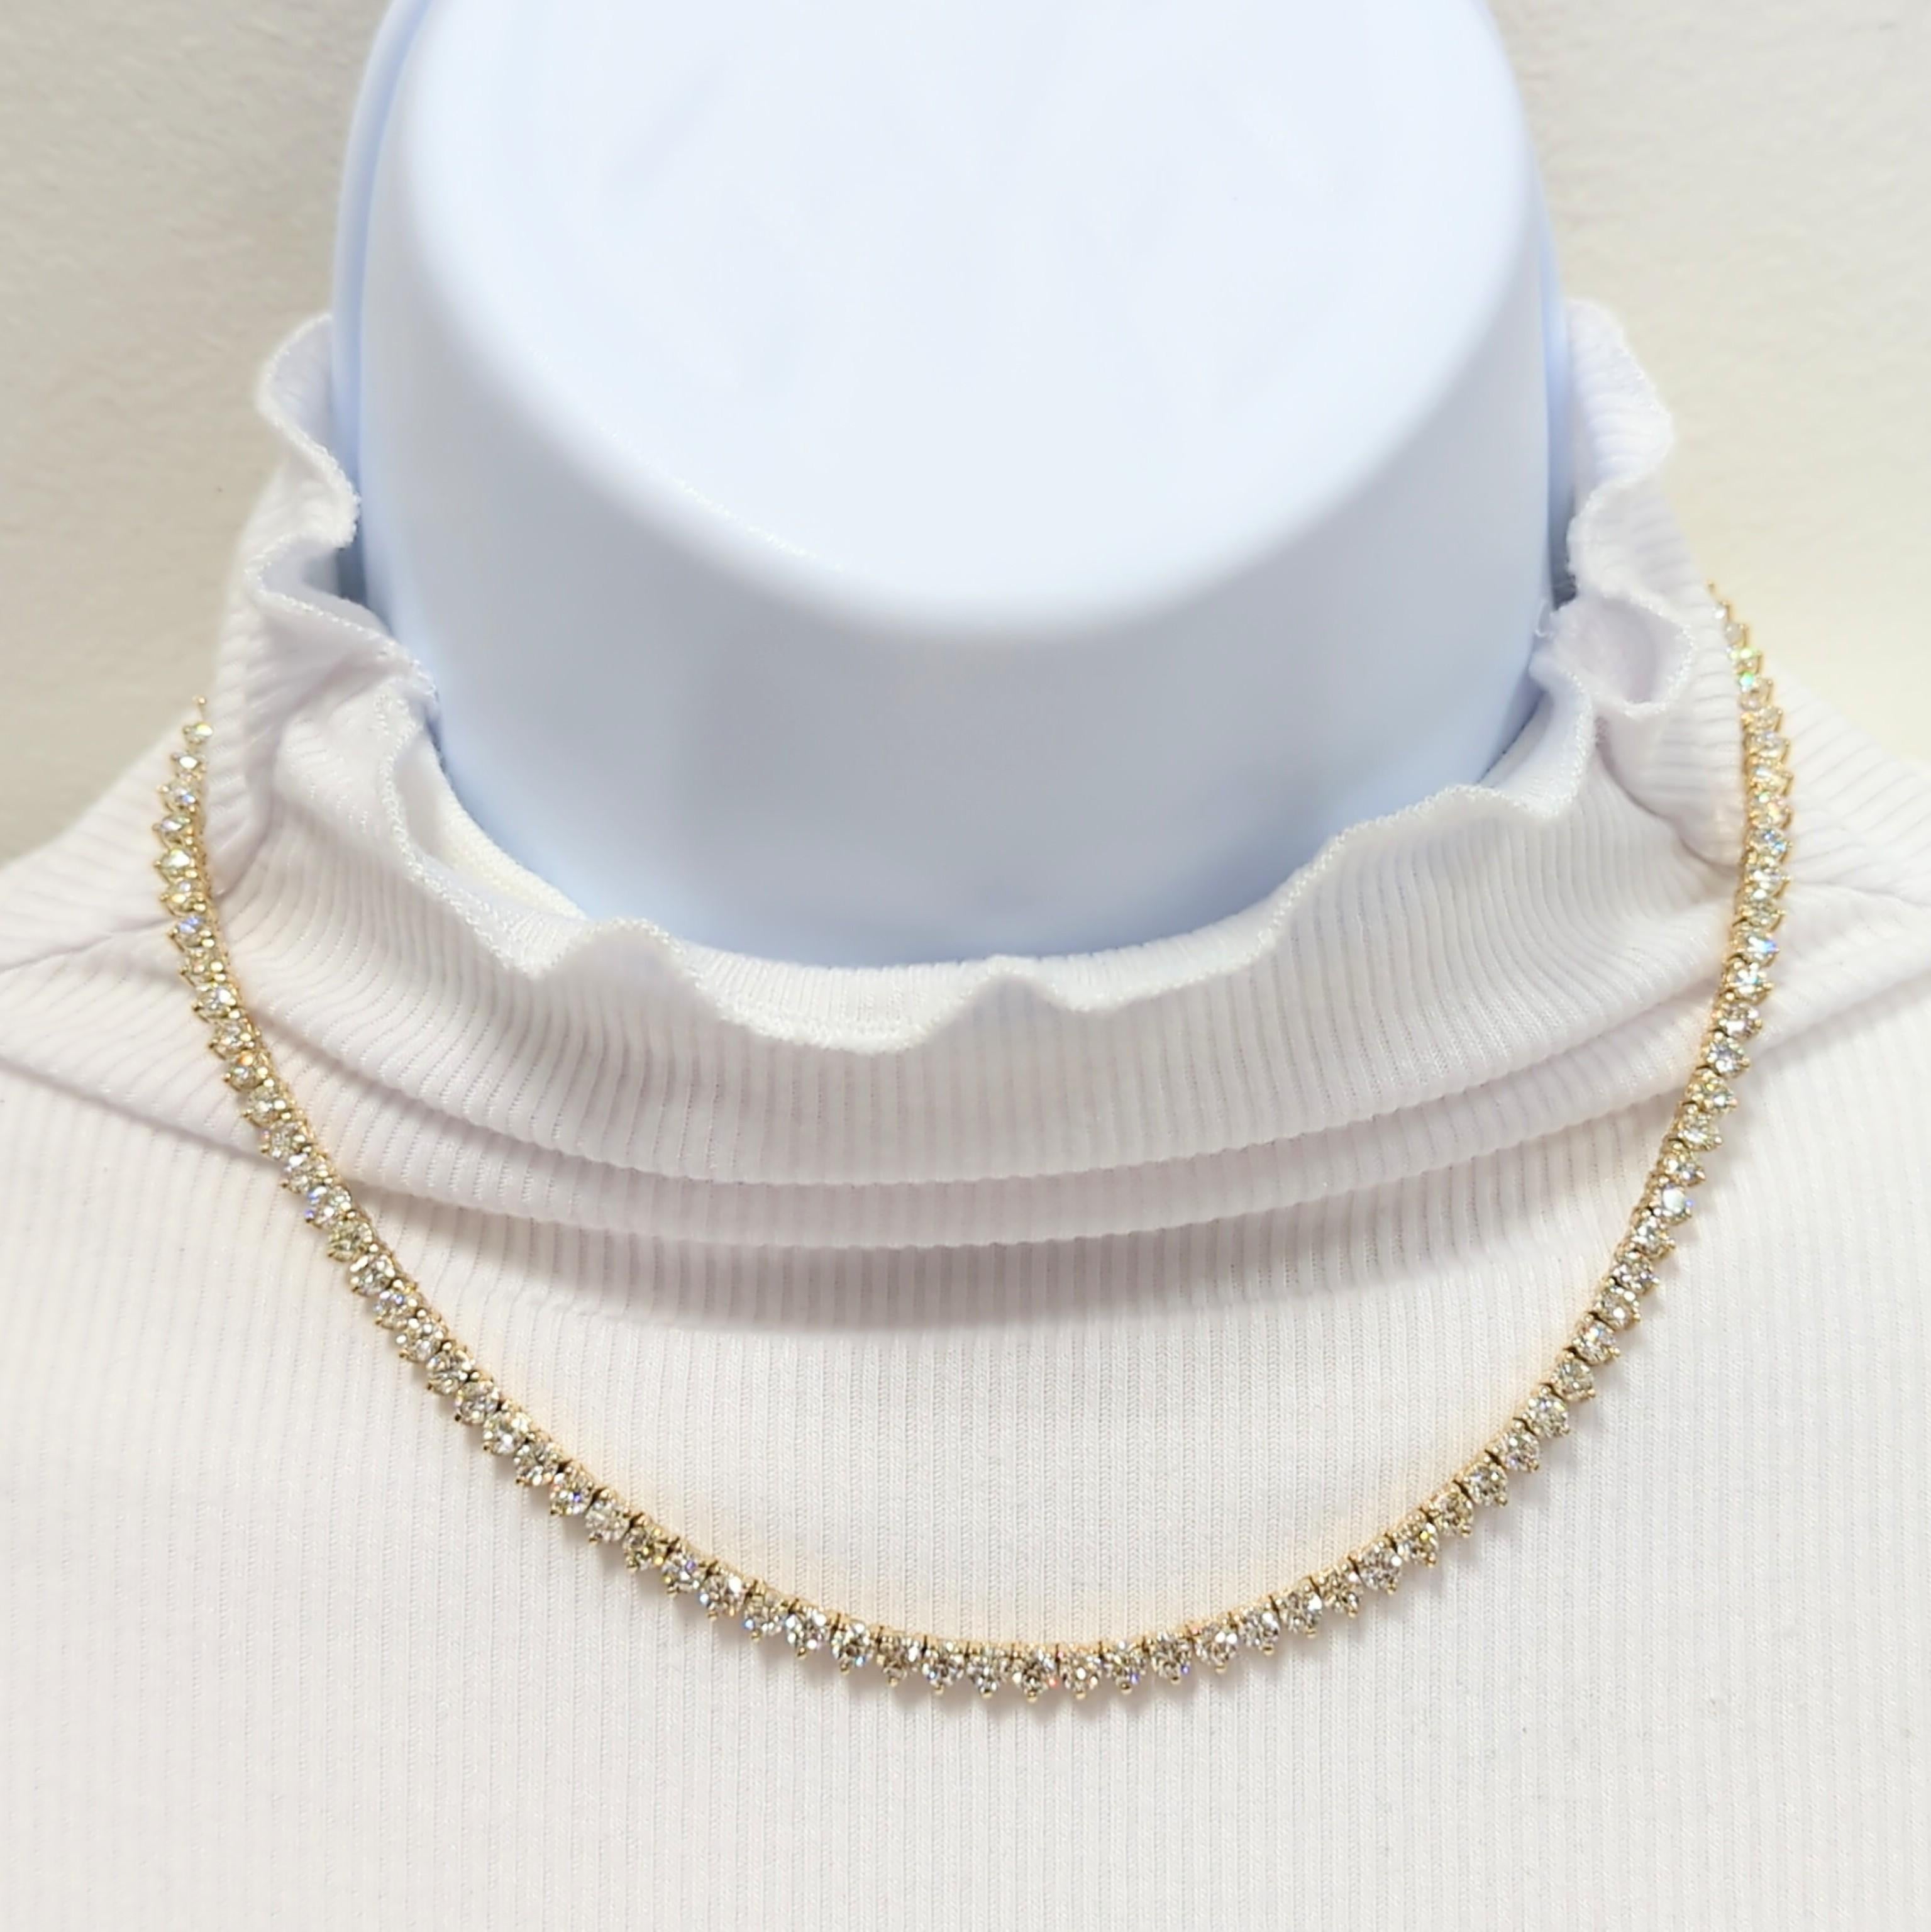 Beautiful 17.65 ct. white diamond rounds.  Handmade in 14k yellow gold.  Length of necklace is 16